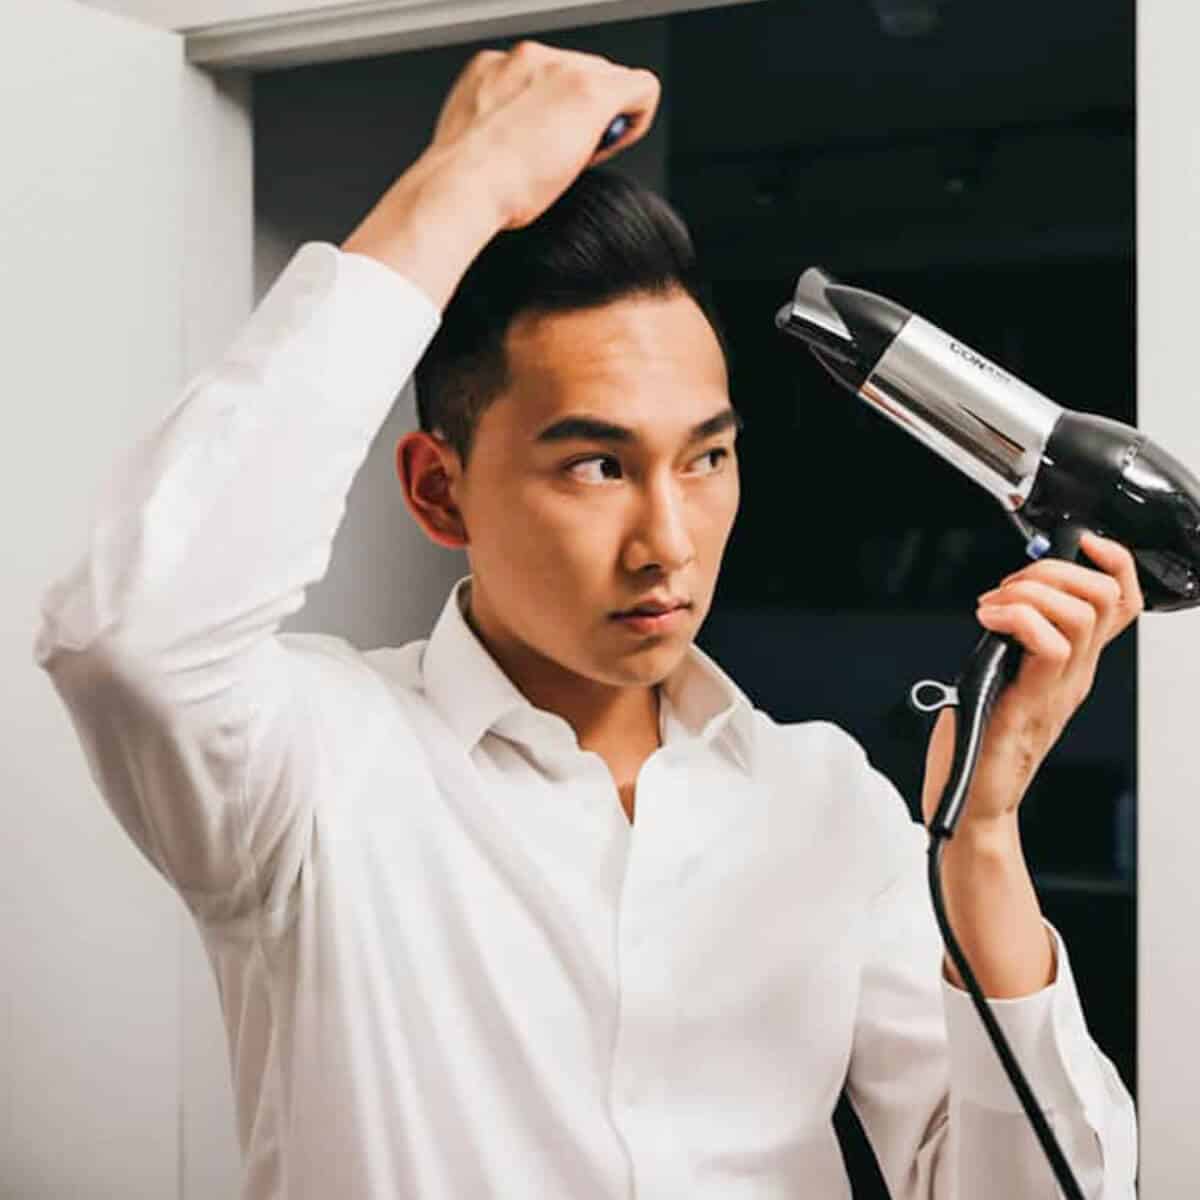 Person using a hair dryer and combing their hair.